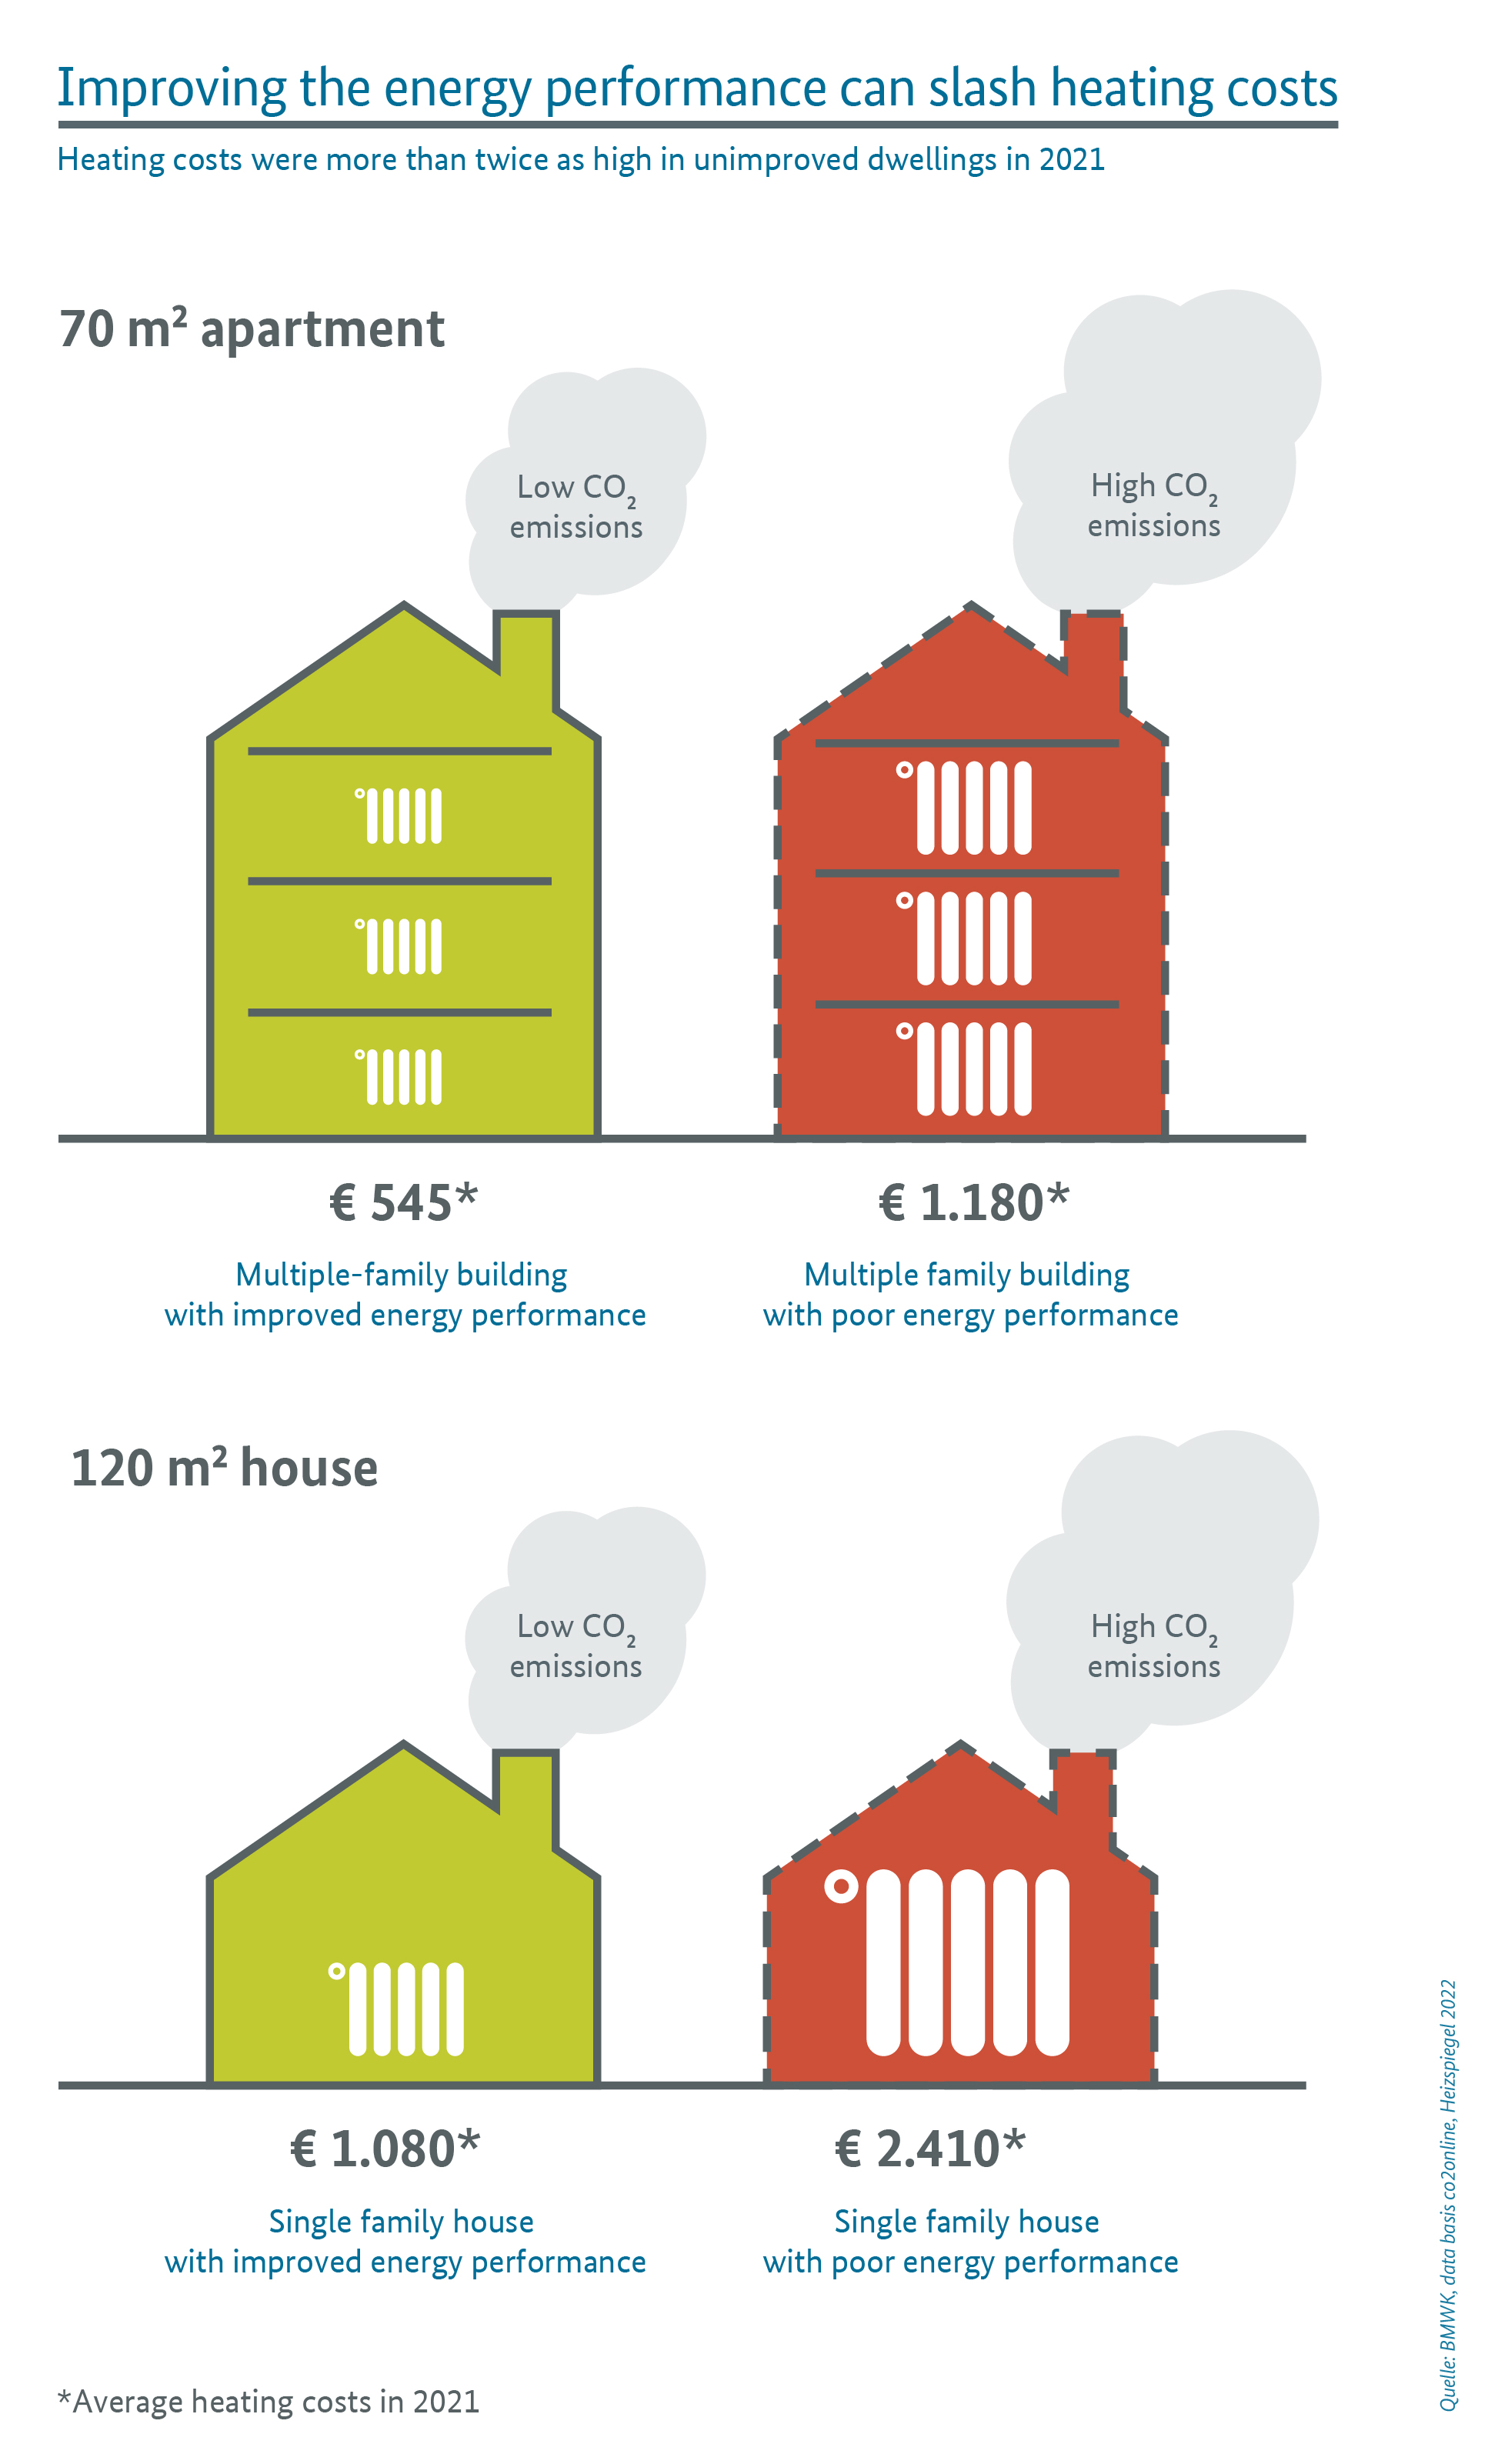 Graphic about Heating costs were more than twice as high in unimproved dwellings in 2021